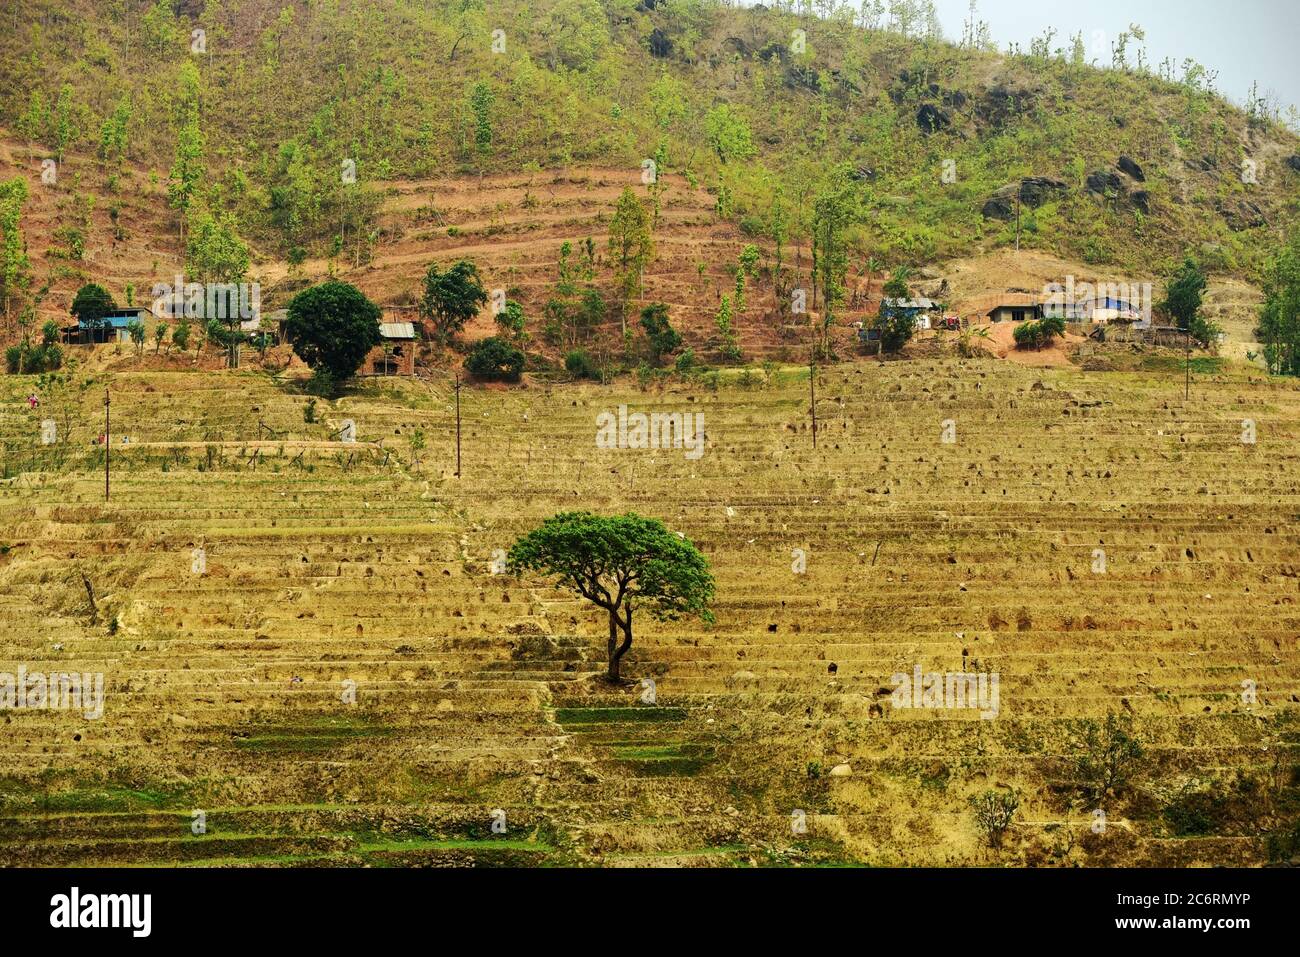 Dry agricultural fields of Nepal, seen from a road connecting Gandaki Pradesh and Bagmati Pradesh provinces. Stock Photo